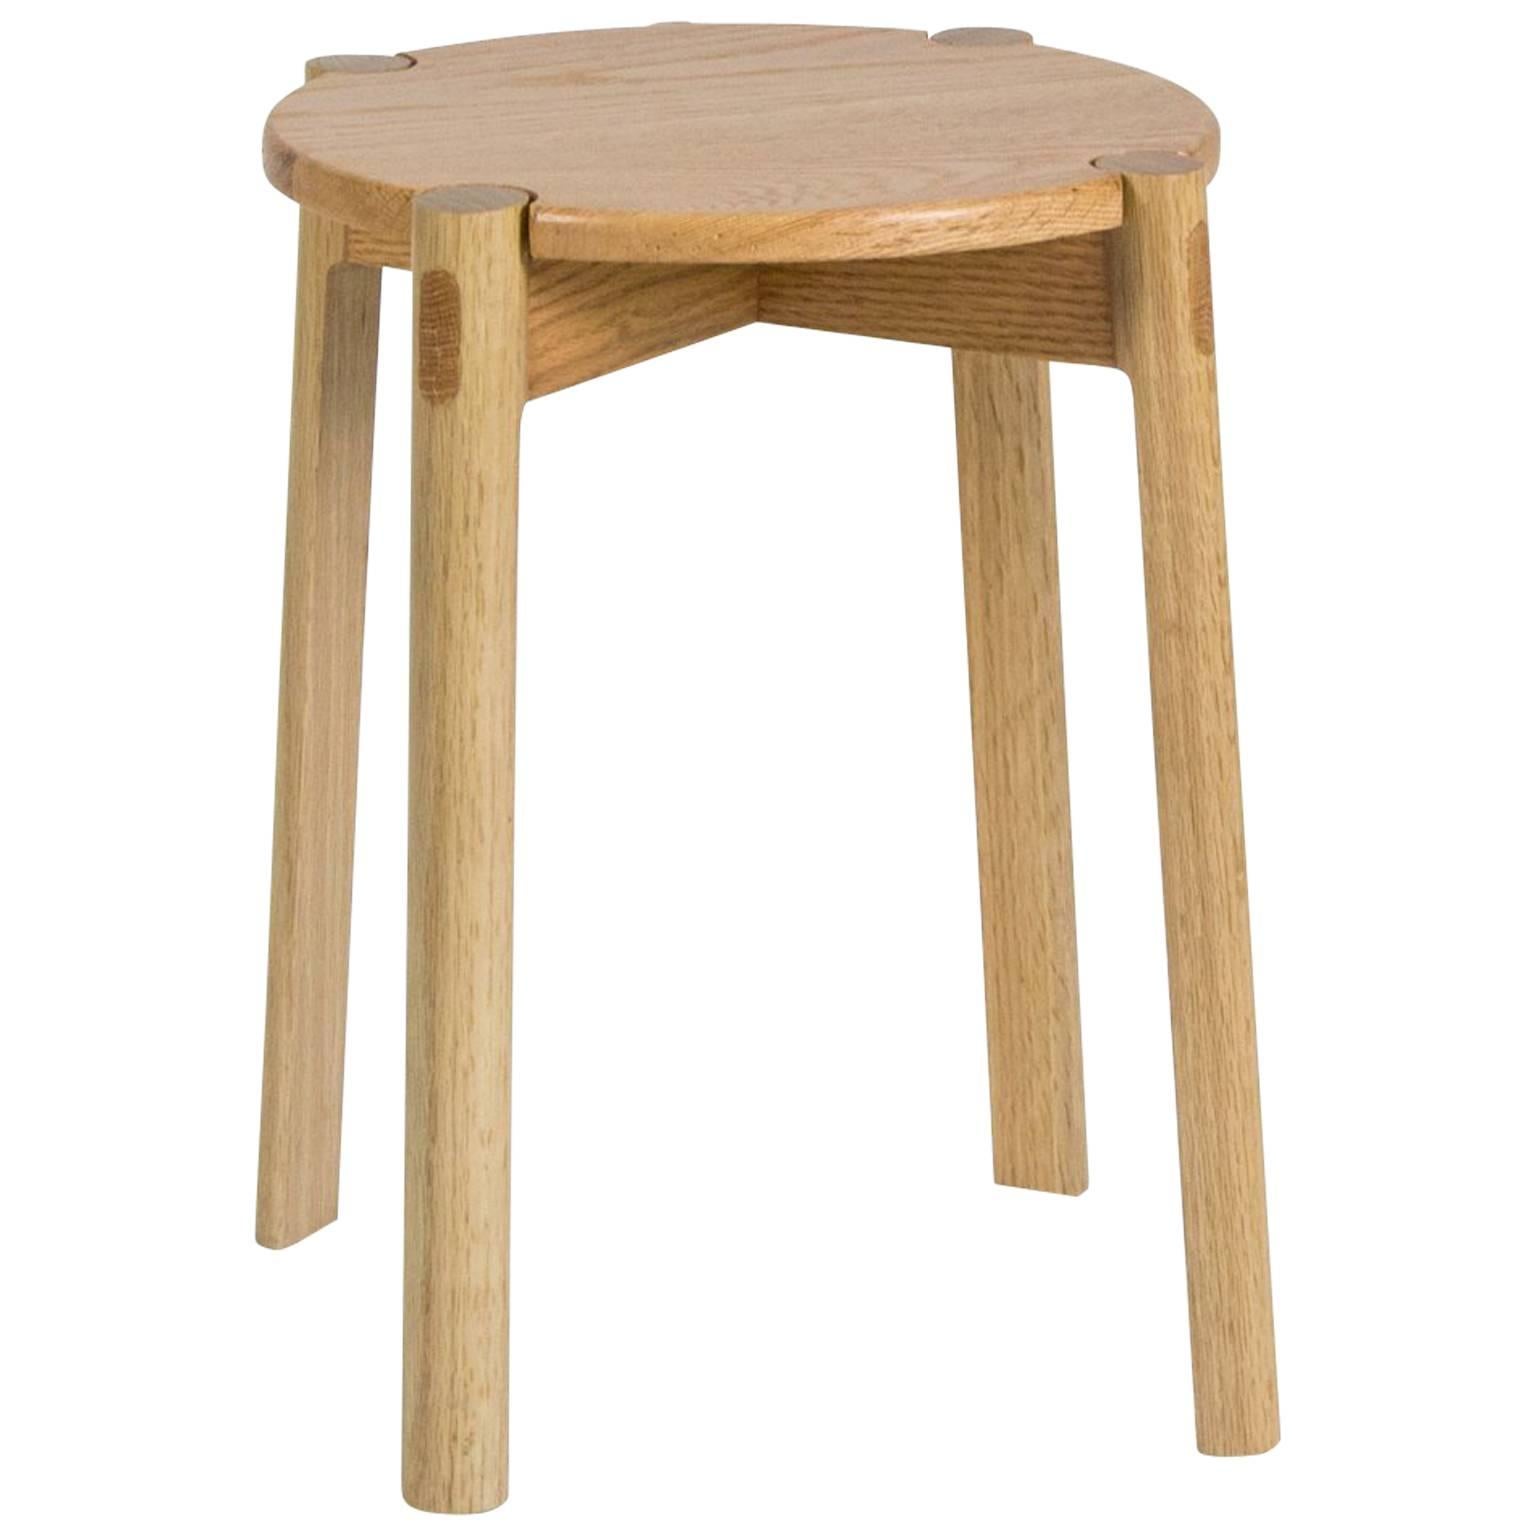 Contemporary Danish Style Wooden Stool For Sale